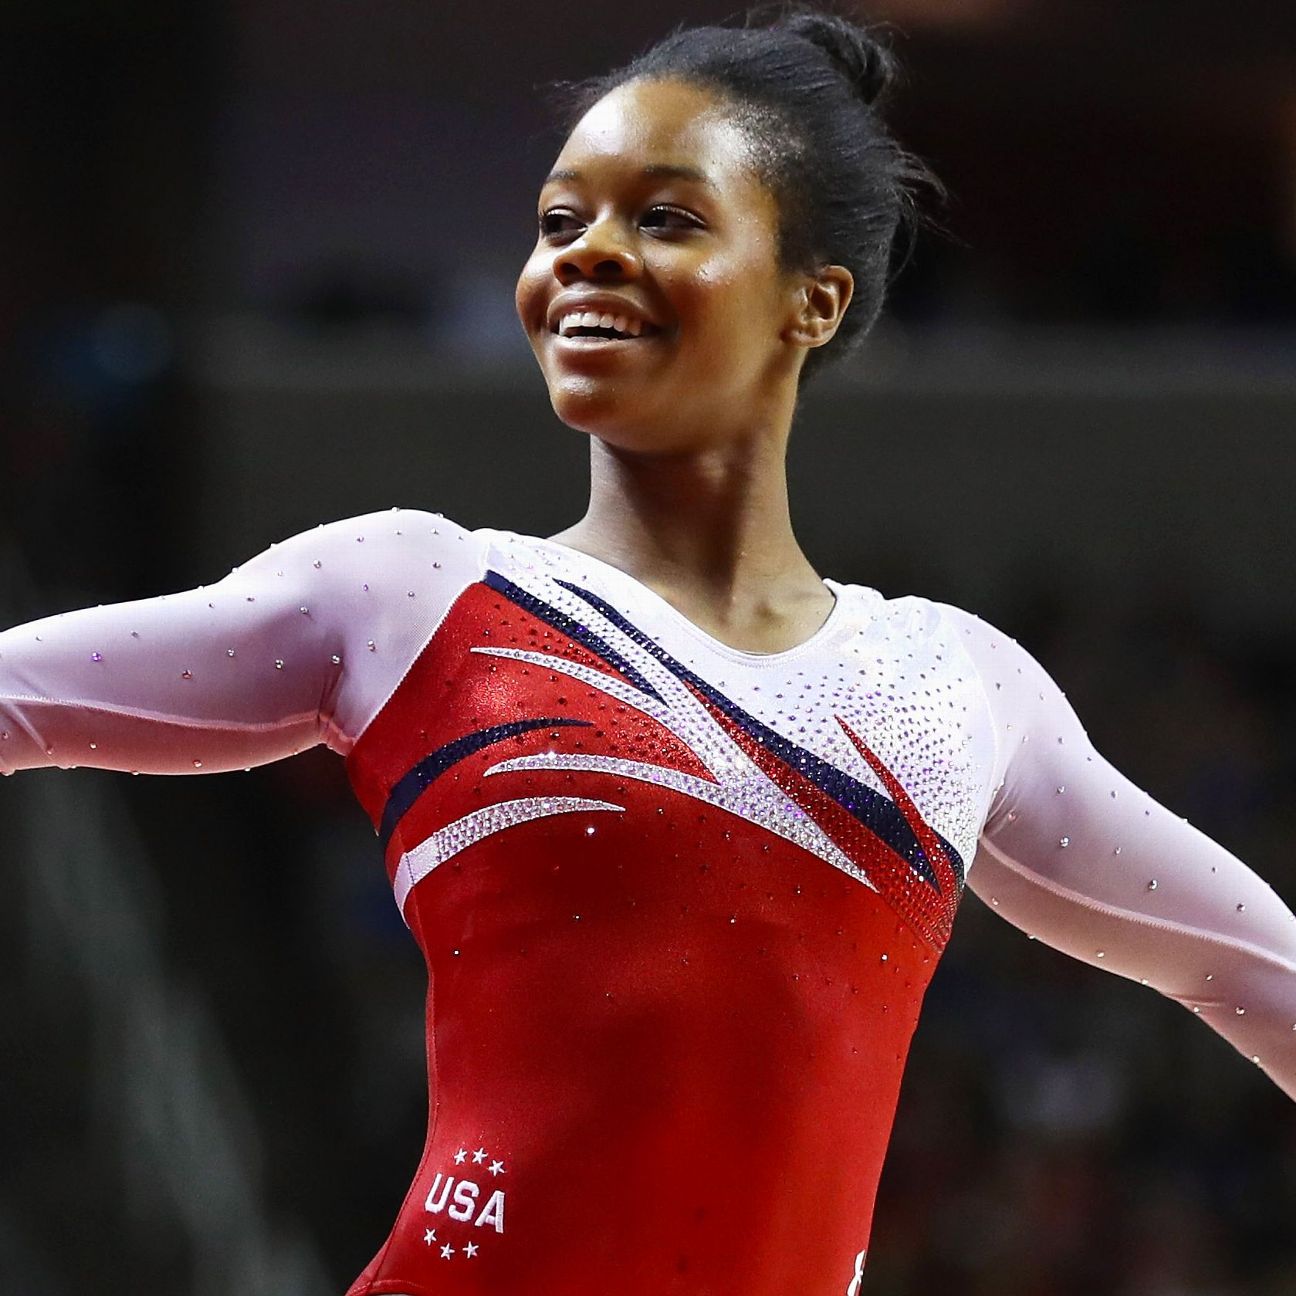 Her current net worth is gabby douglas's personal life. 